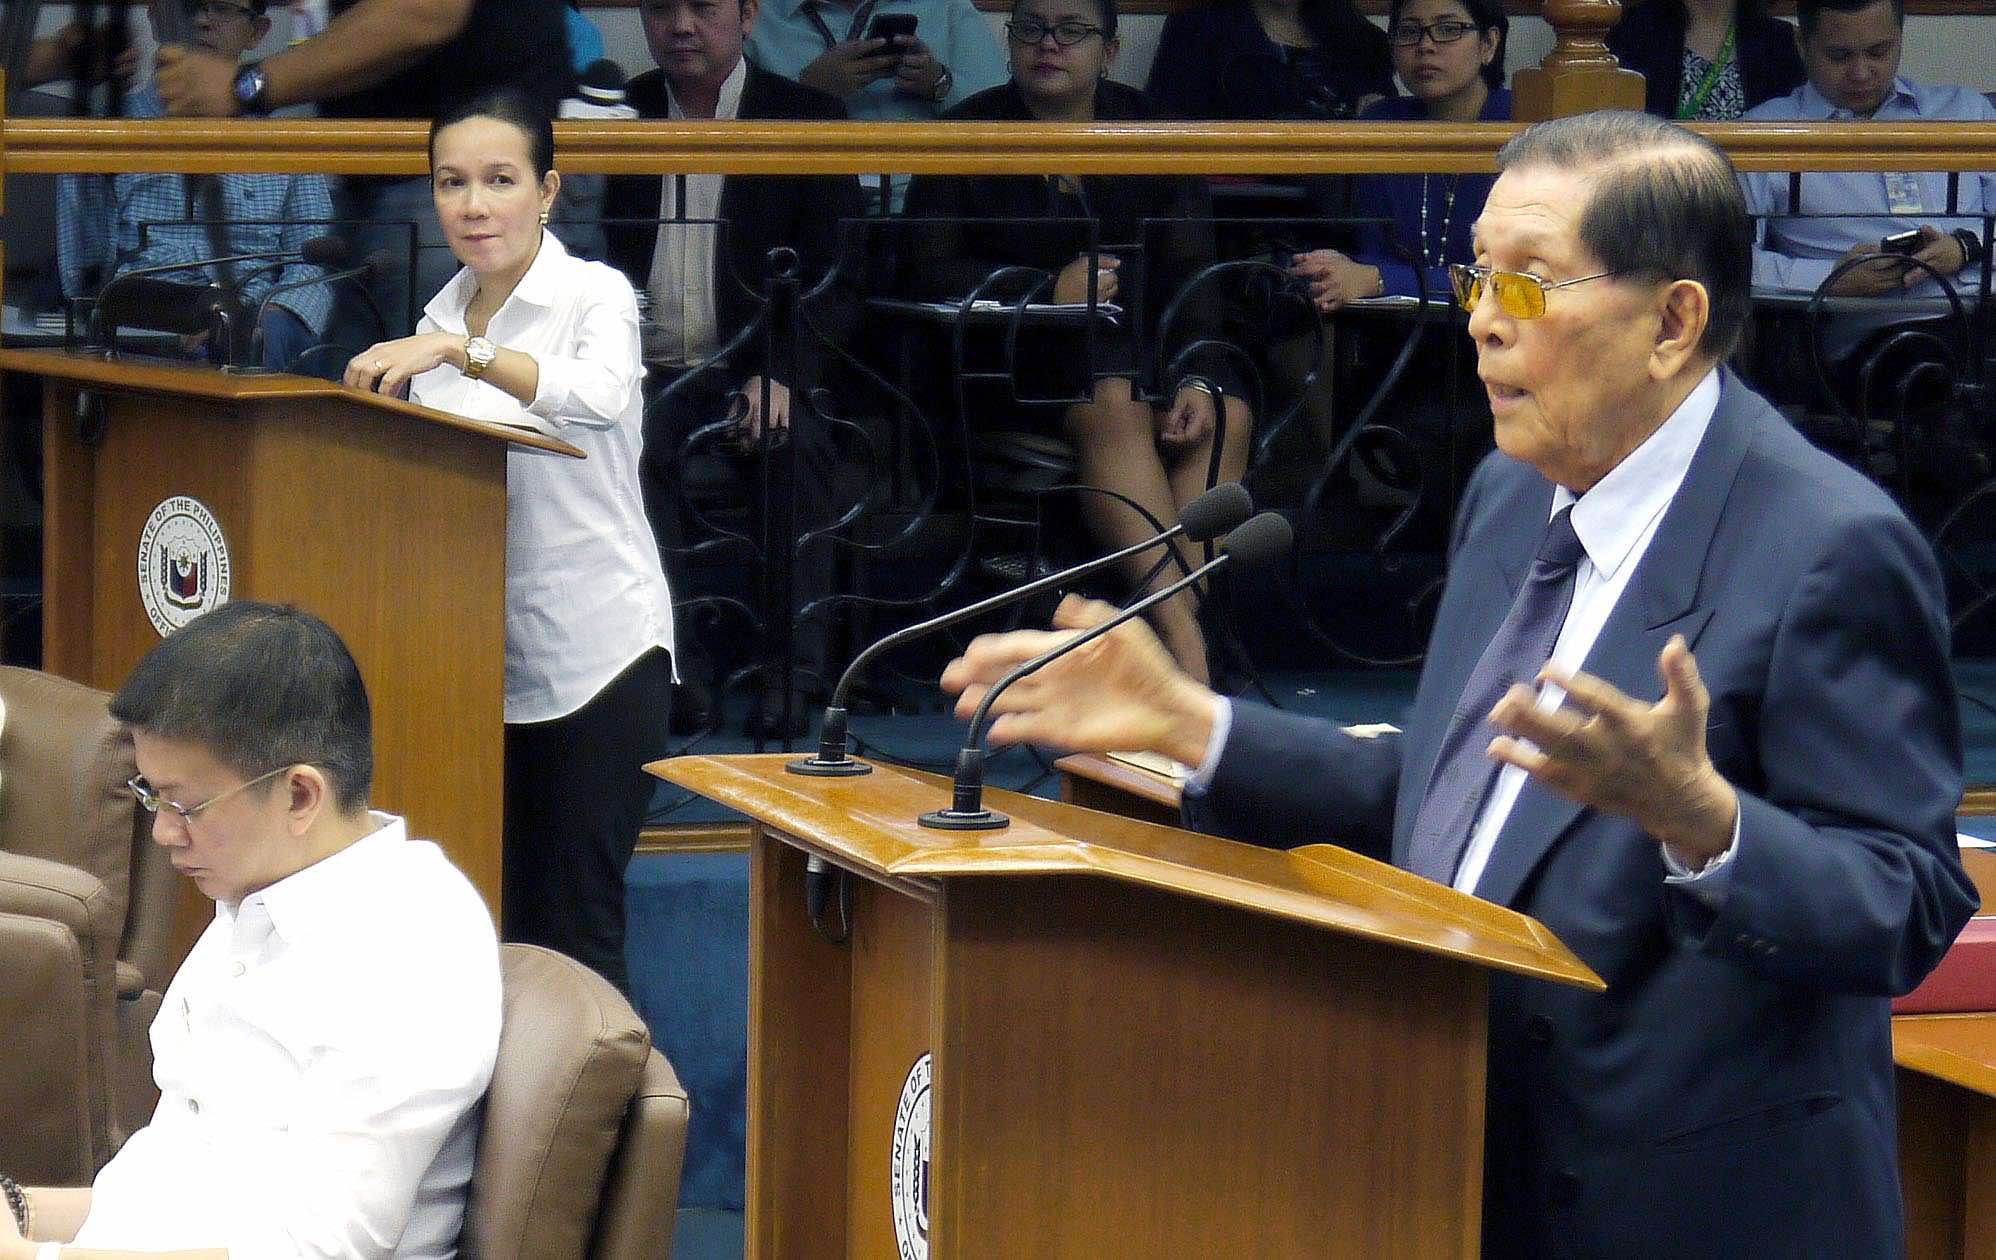 JPE to Grace Poe: What happened to Mamasapano report?